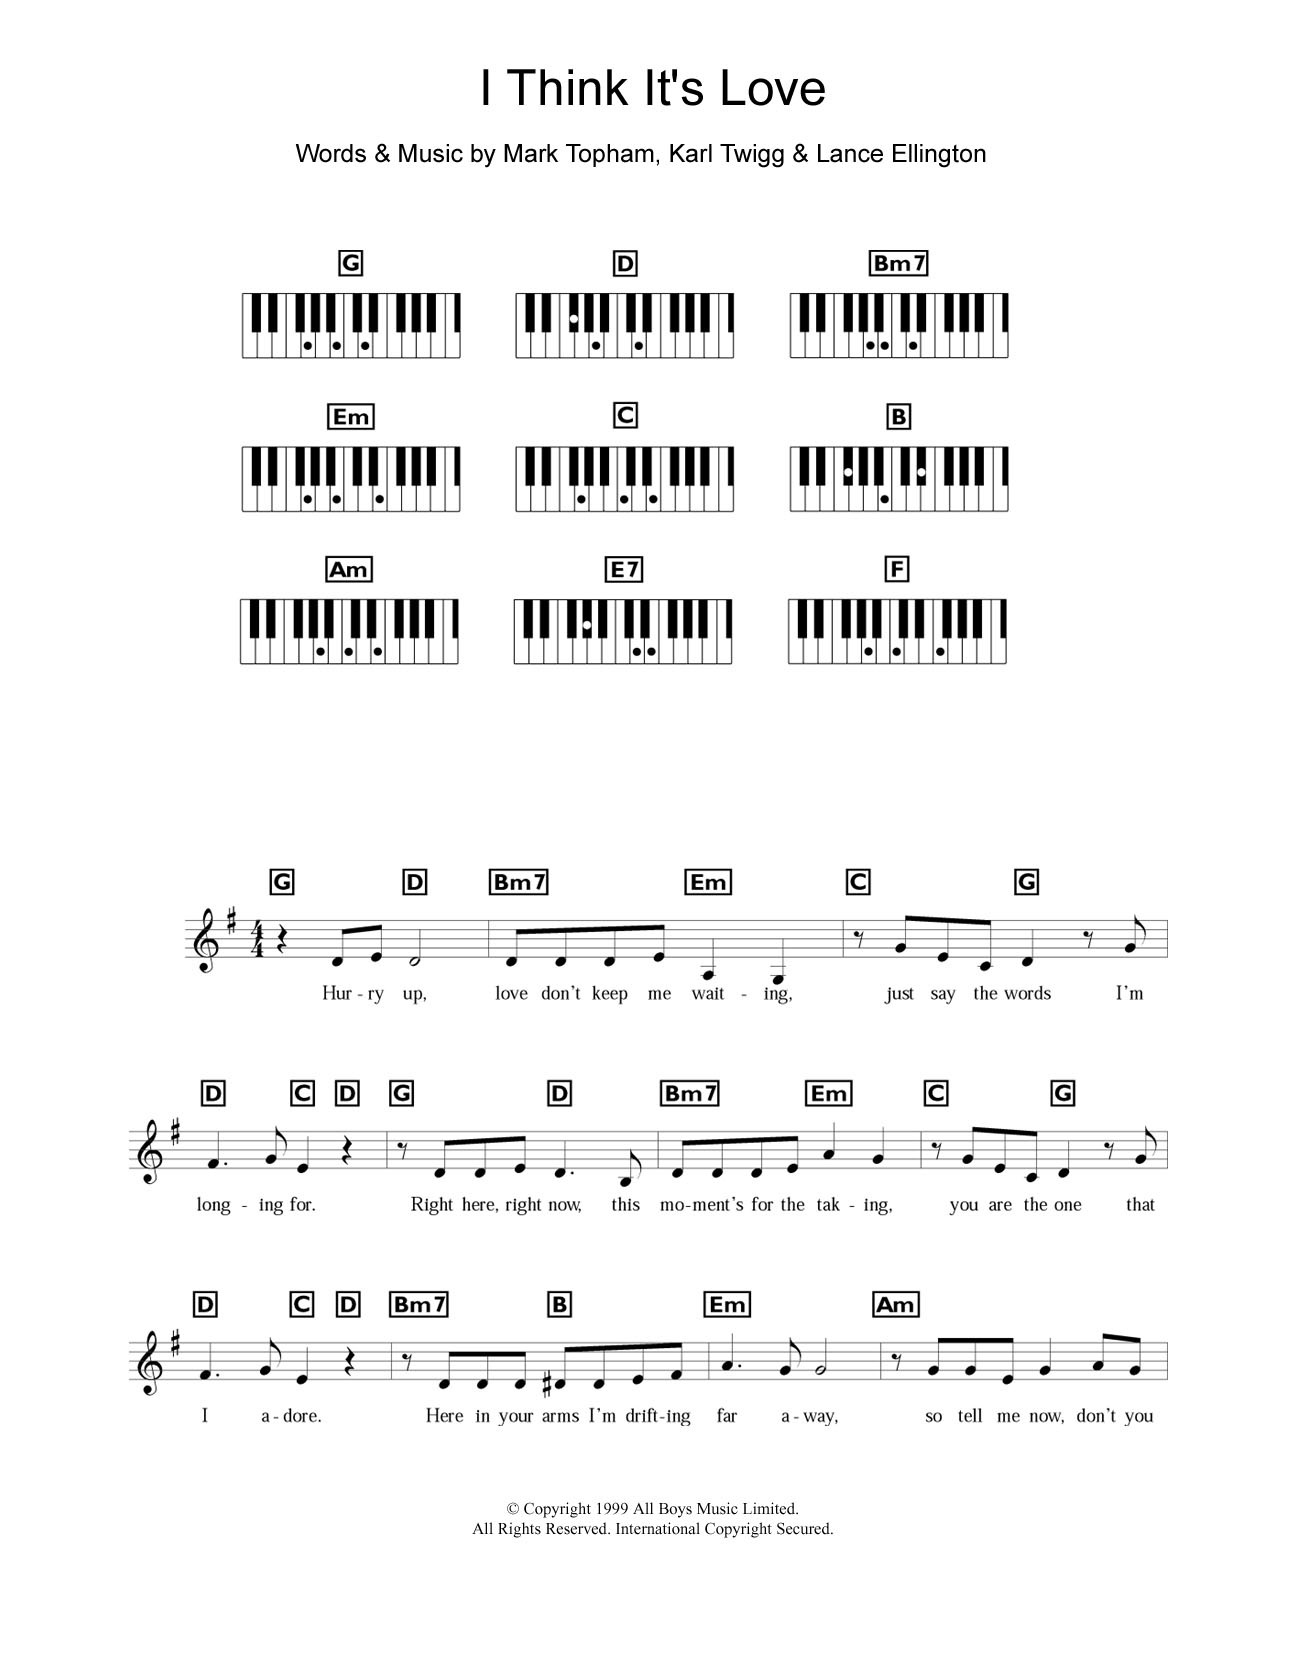 Download Steps I Think It's Love Sheet Music